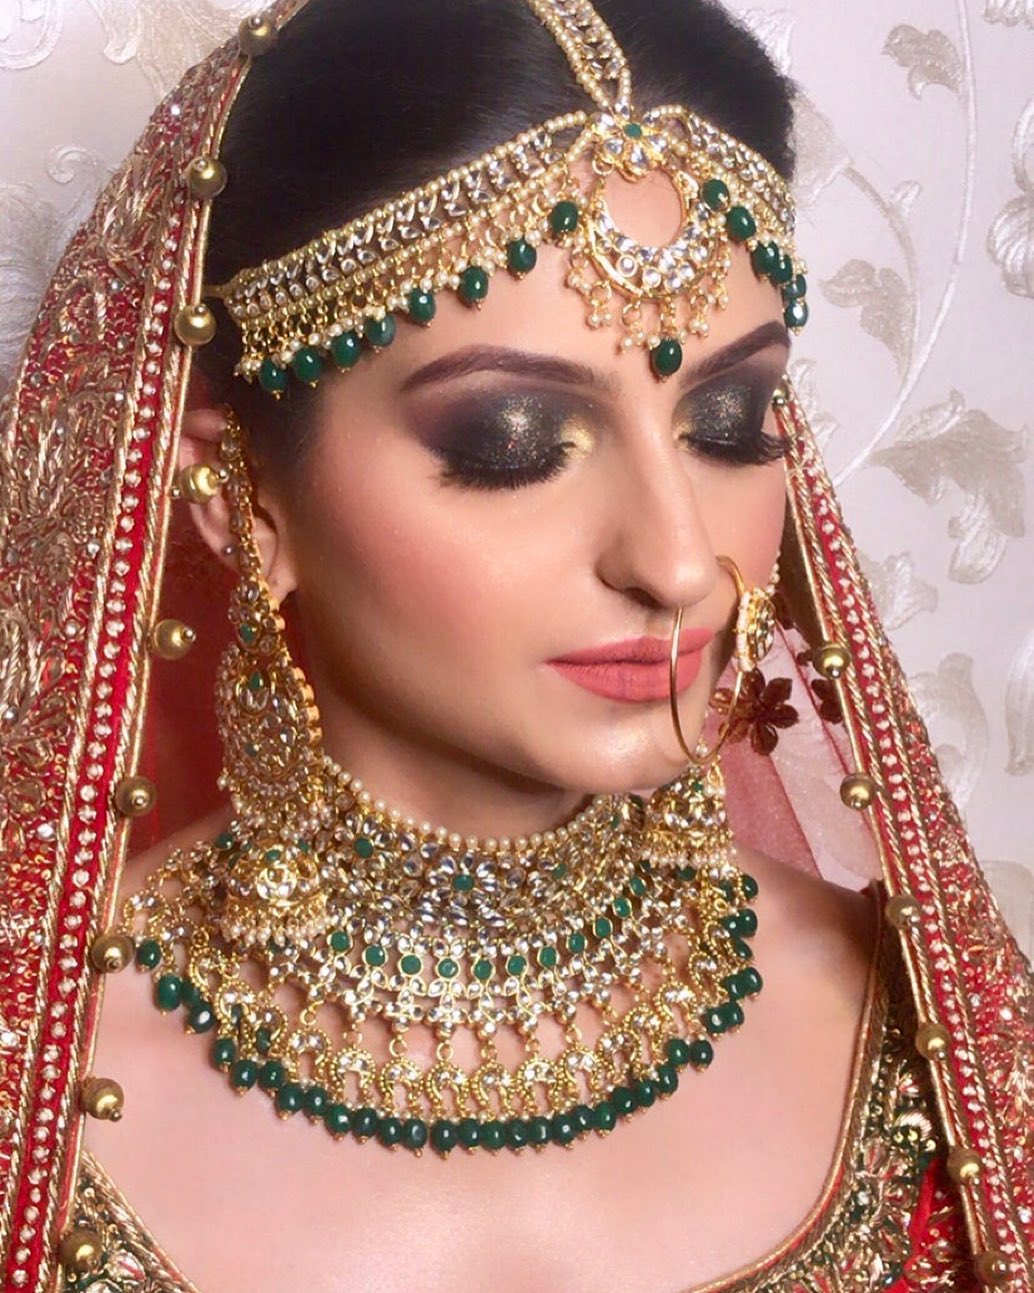 Best wedding services in India: Best Makeup Artists Services